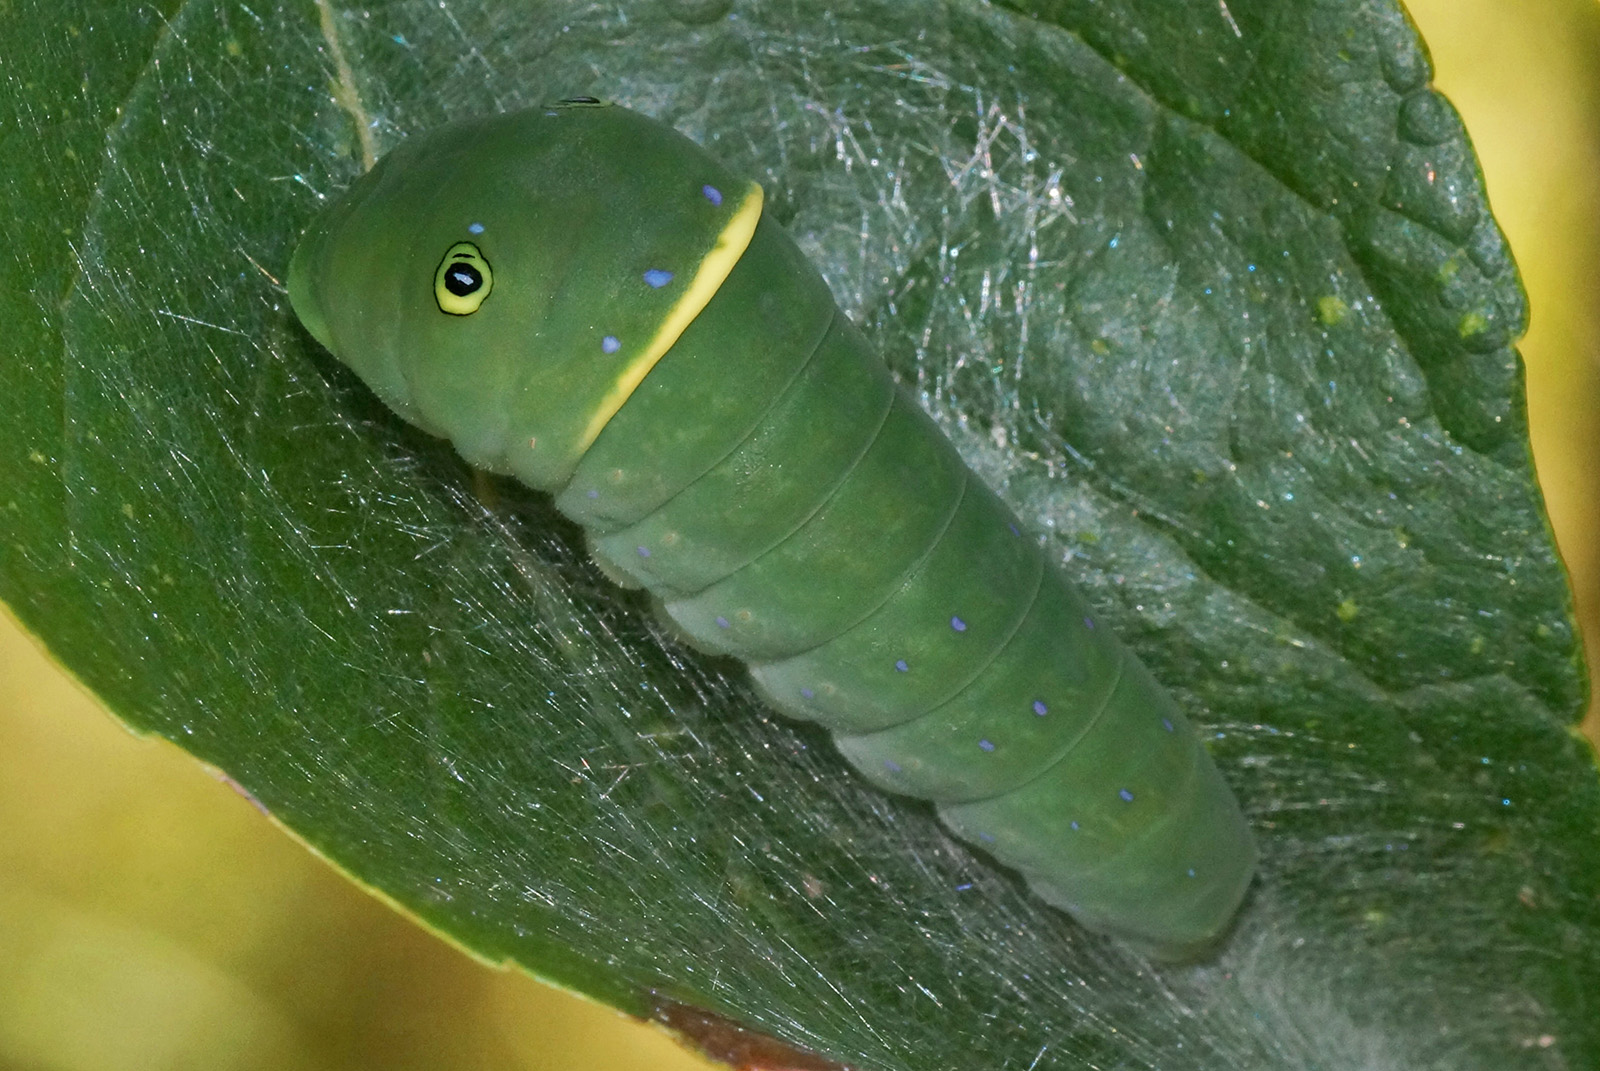 An image of an green caterpillar with a yellow ring and an eye like spot on its head